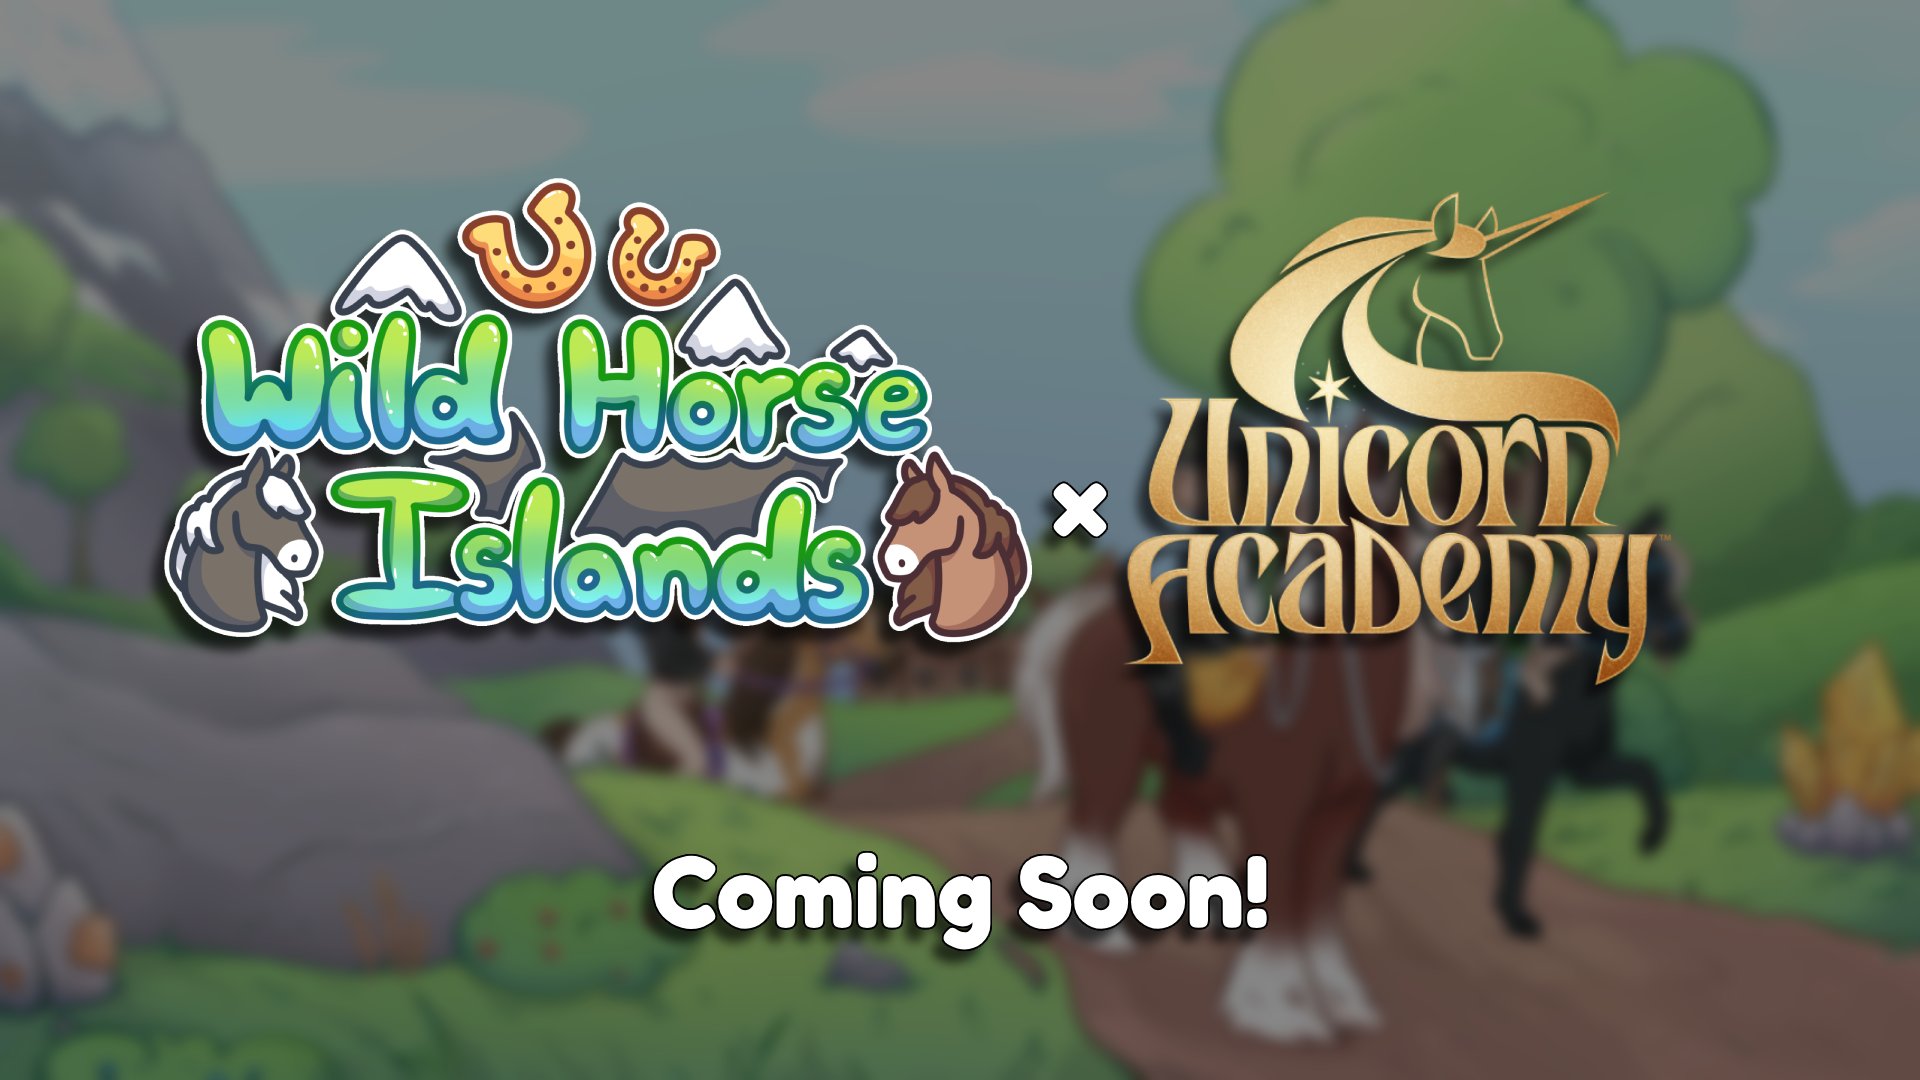 Wild Horse Islands  How to Claim Codes! + Special Item Code! 